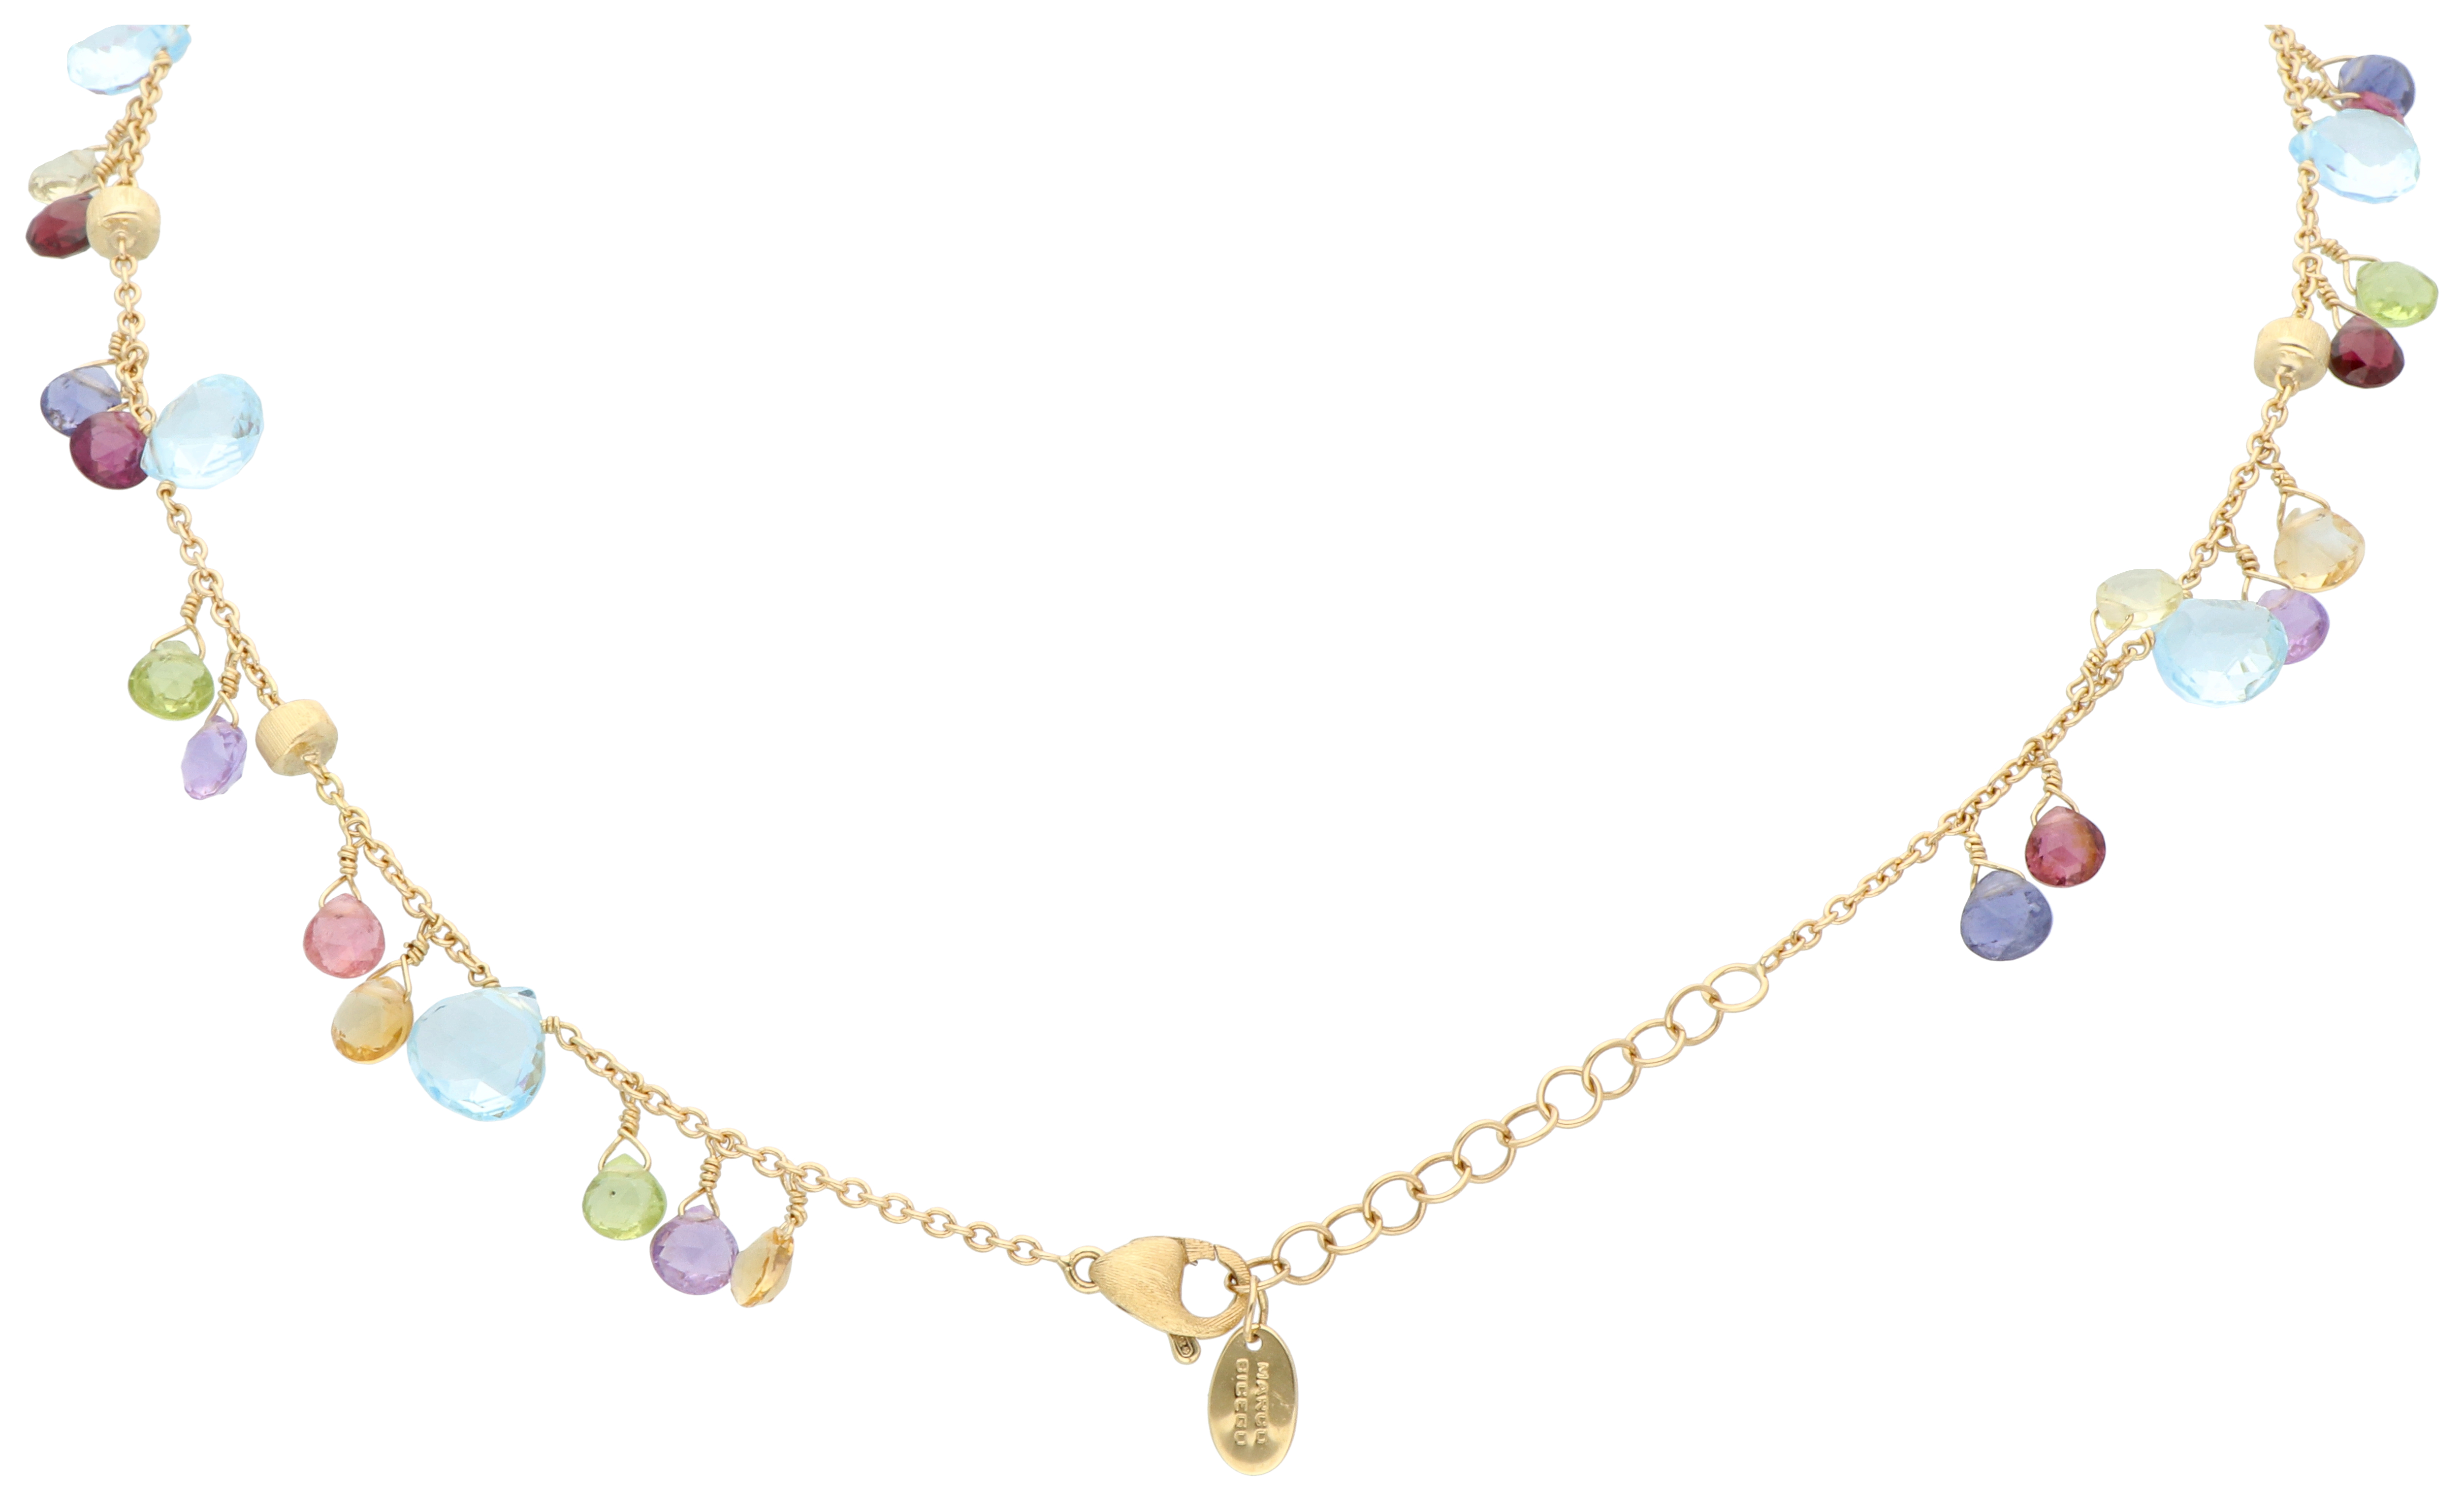 No Reserve - Marco Bicego 'Paradise' collection 18K yellow gold necklace with mix of gemstones - Image 3 of 5